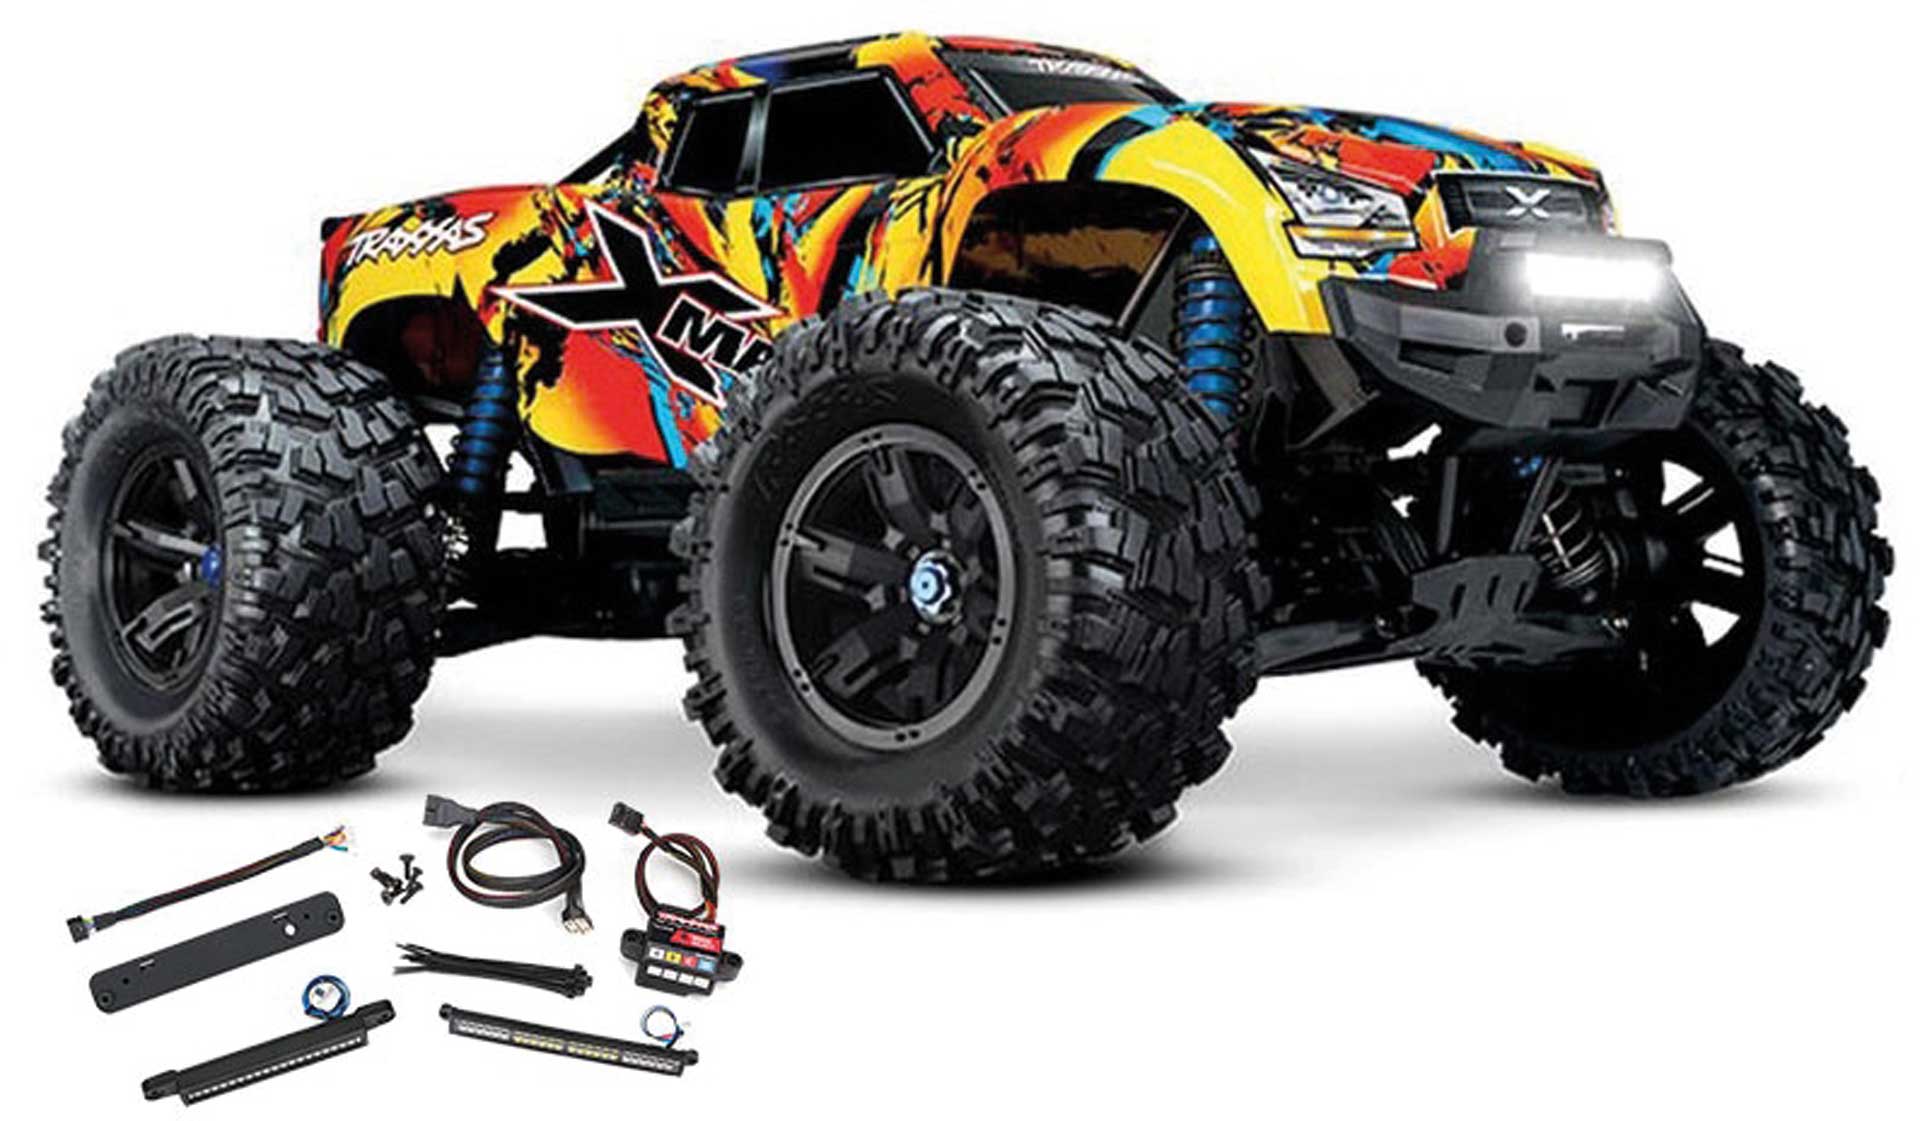 TRAXXAS X-MAXX 4X4 SOLAR-FLARE 1/7 MONSTER-TRUCK RTR without Battery and Charger